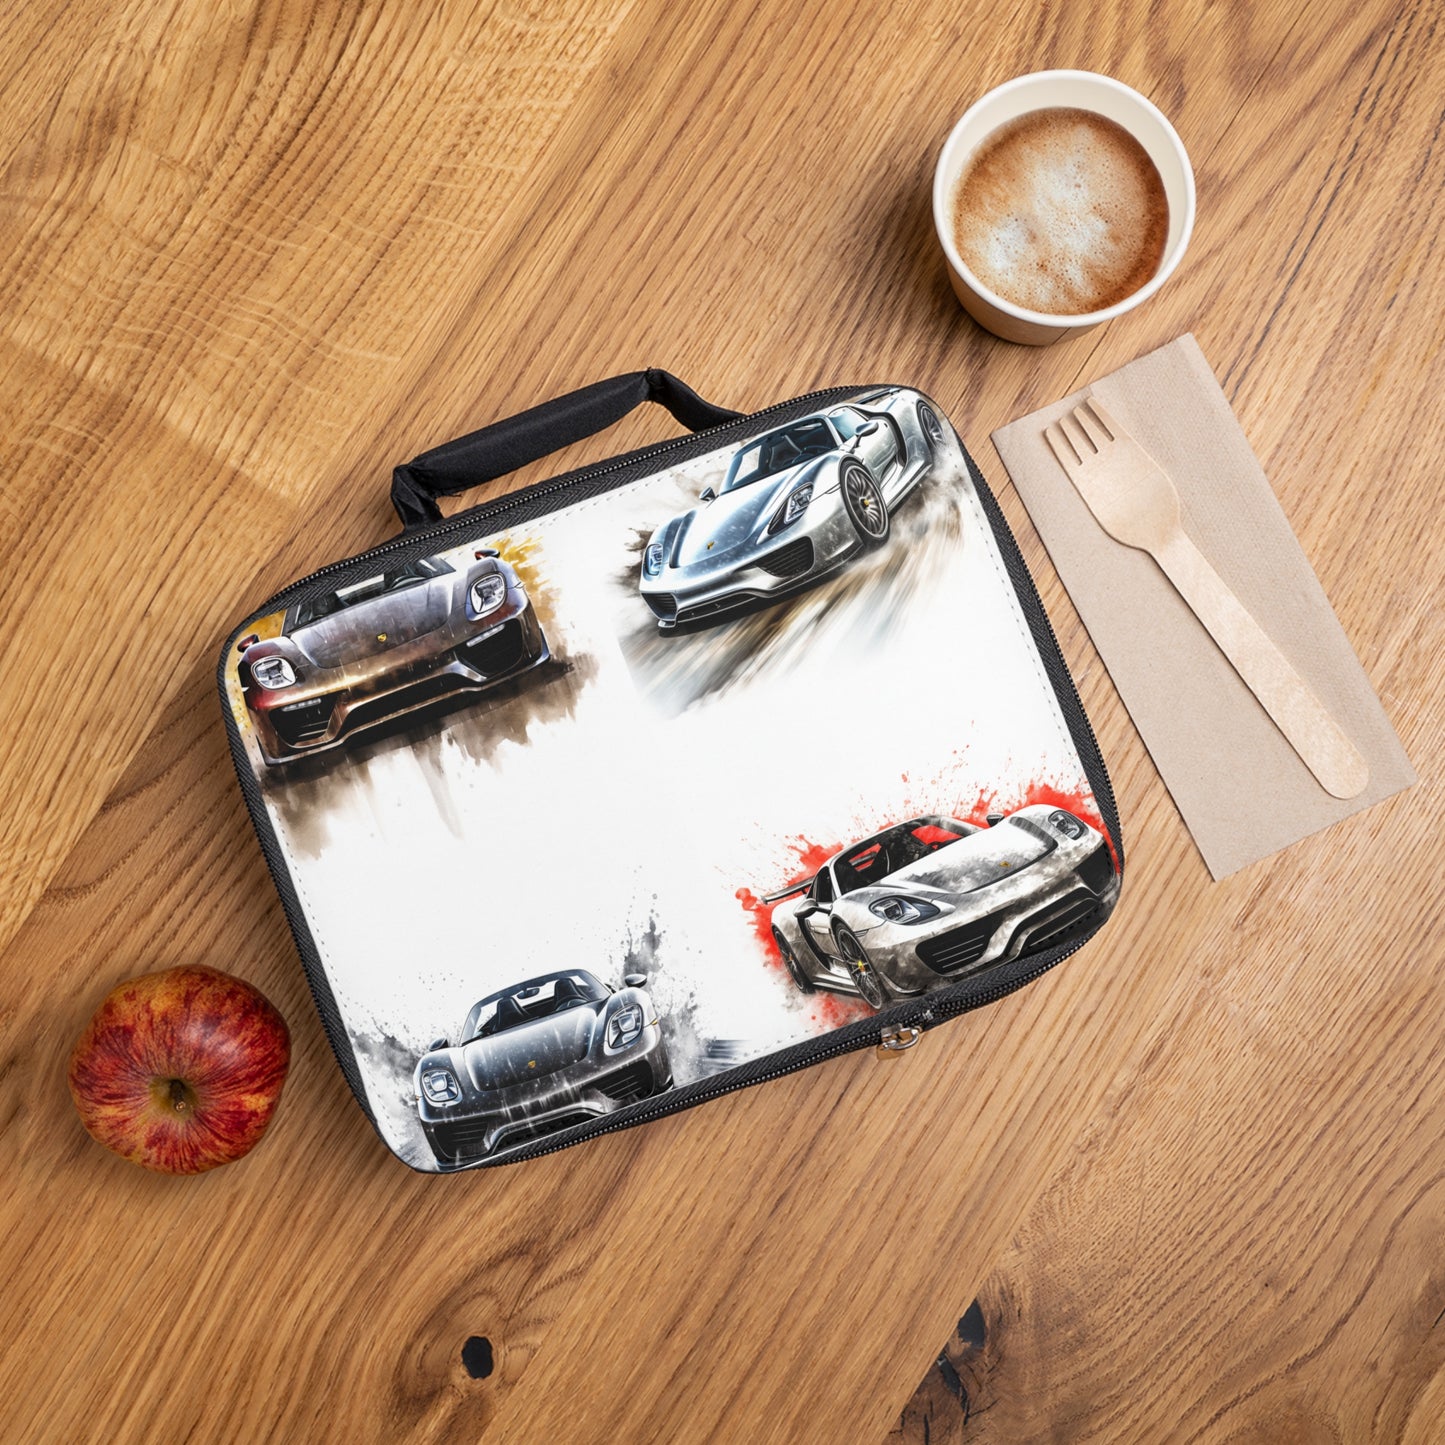 Lunch Bag 918 Spyder white background driving fast with water splashing 5